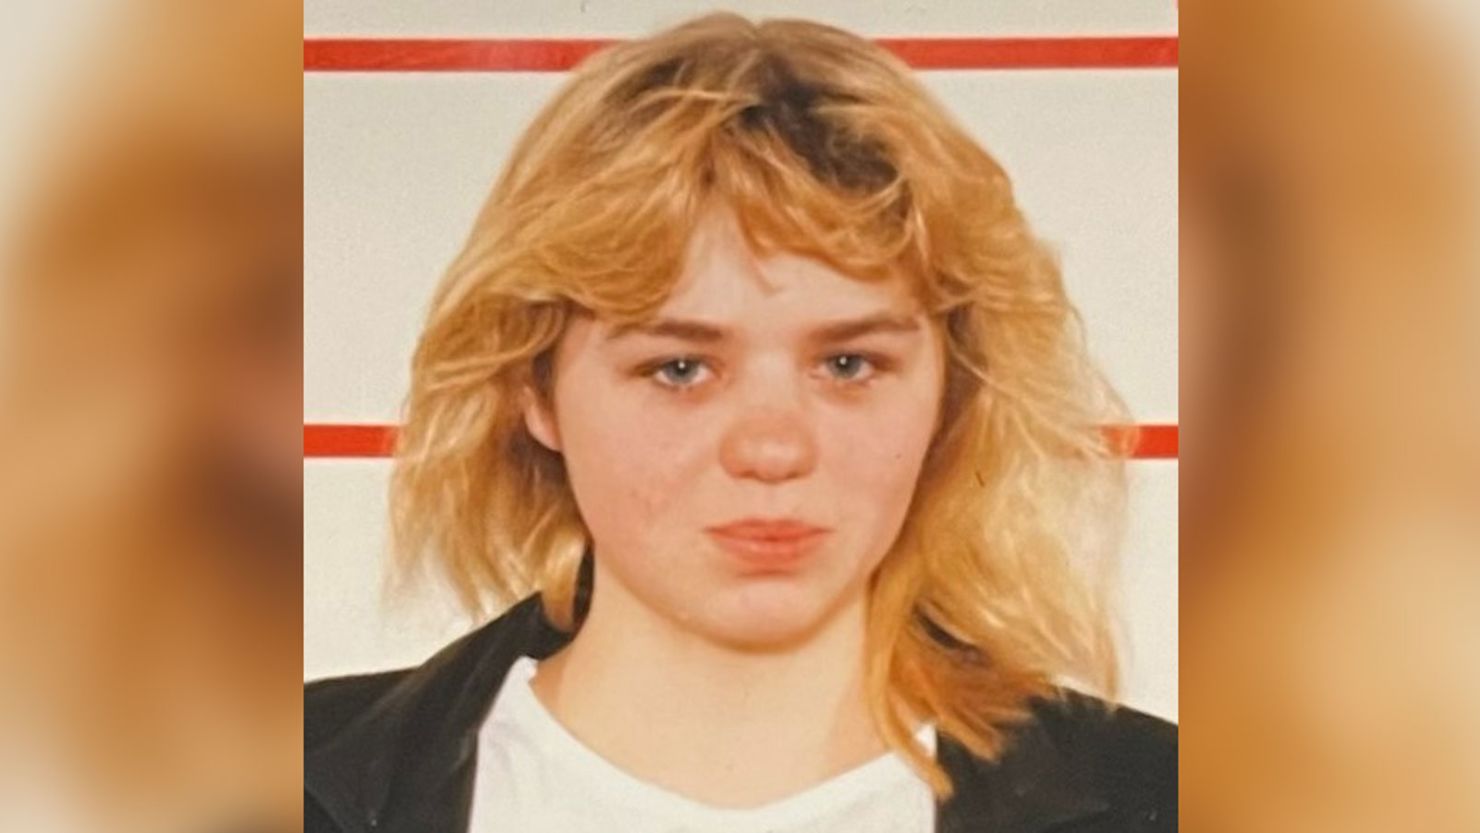 The body of Tabetha Murlin was found 'badly decomposed' in a house in Fort Wayne, Indiana, in 1992.